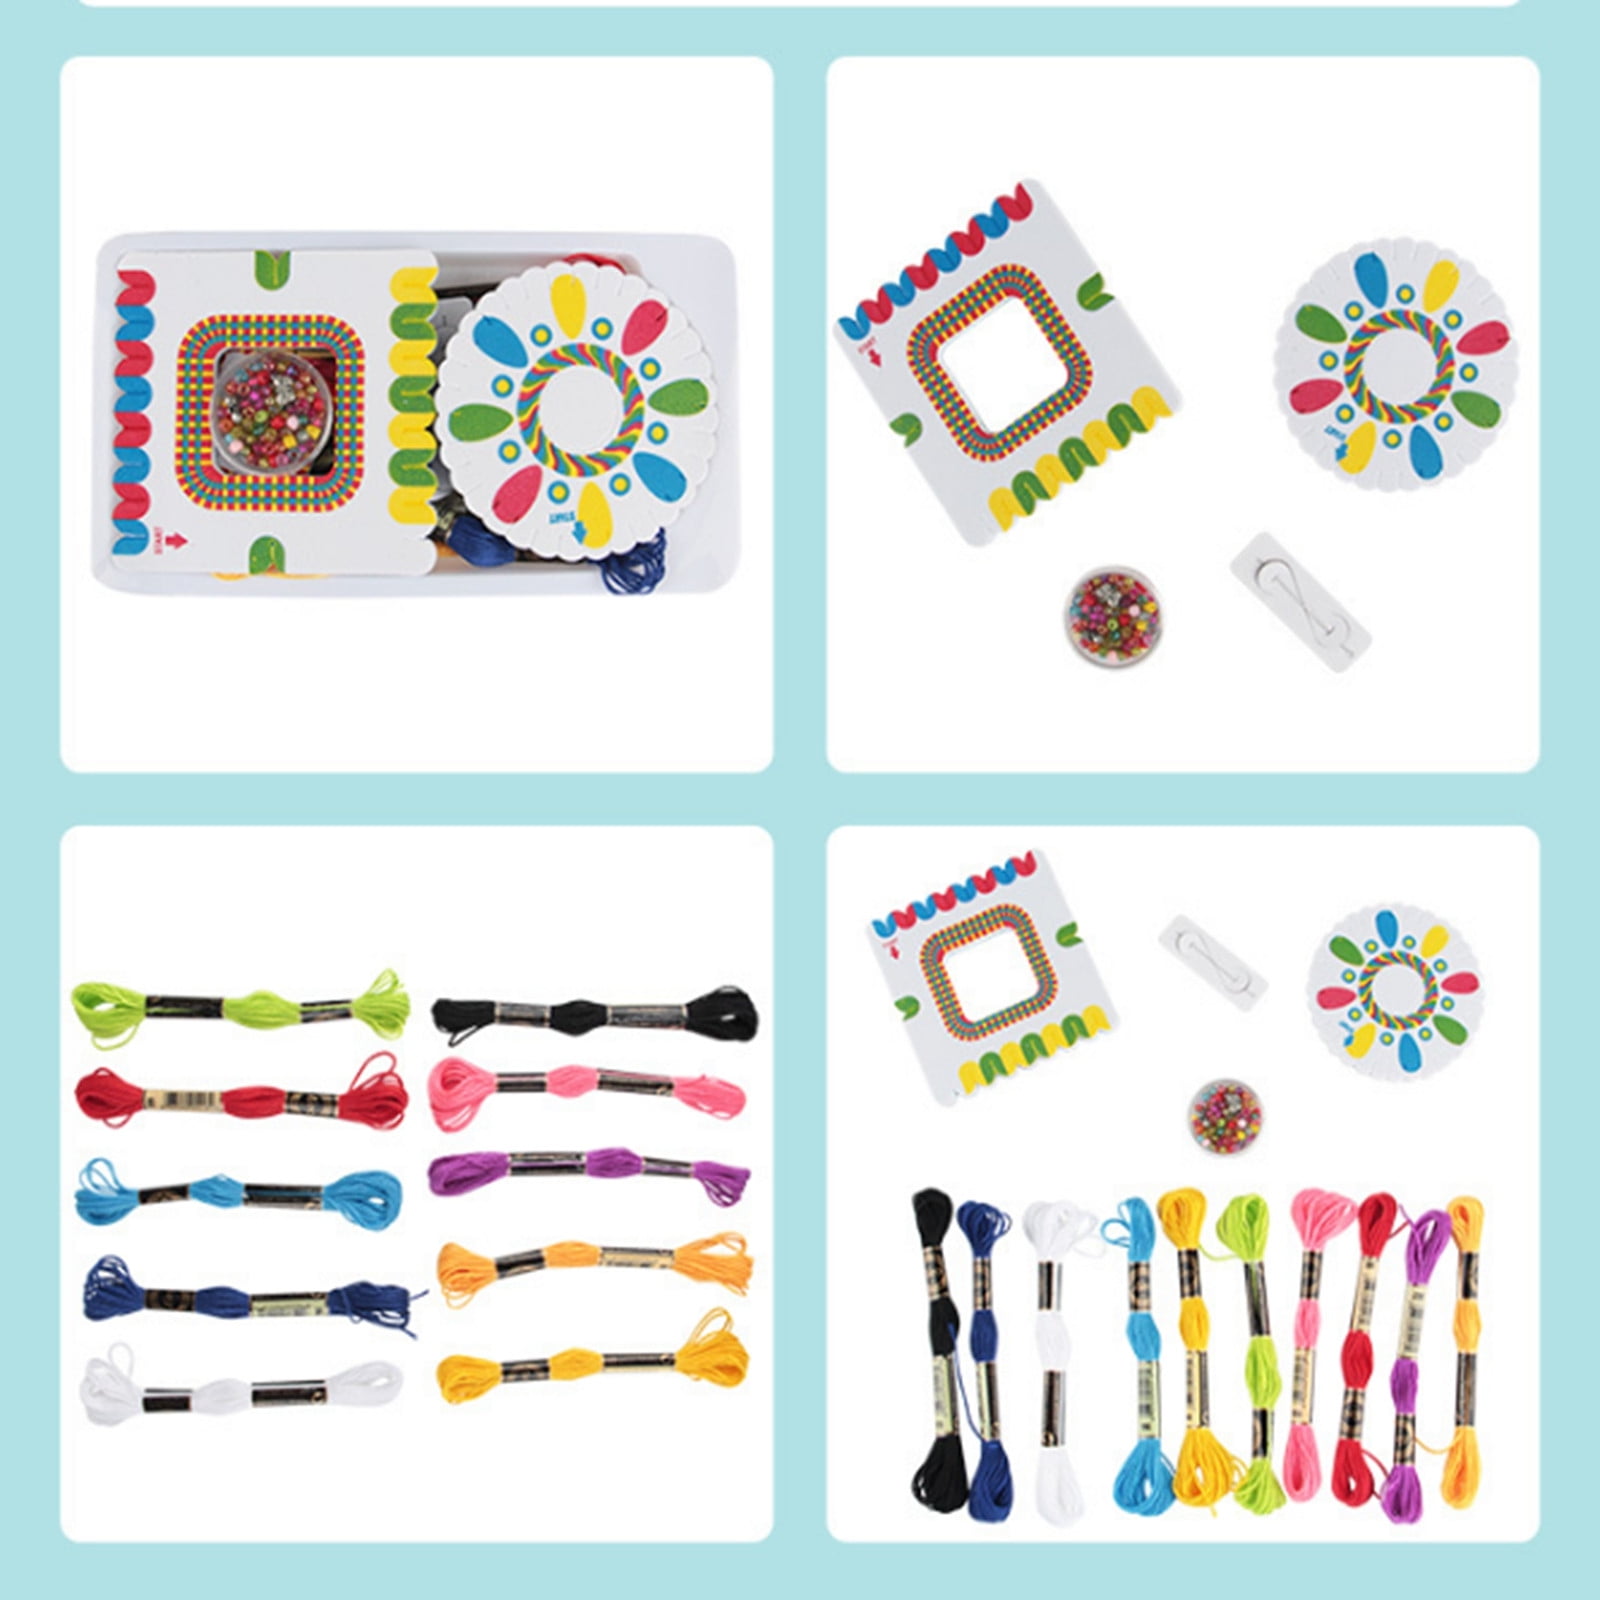 Holloyiver Friendship Bracelet Making Kit, Arts and Crafts for Kids Ages  8-12, Kids Jewelry Making Kit with 10 Pre-Cut Threads,Christmas Birthday